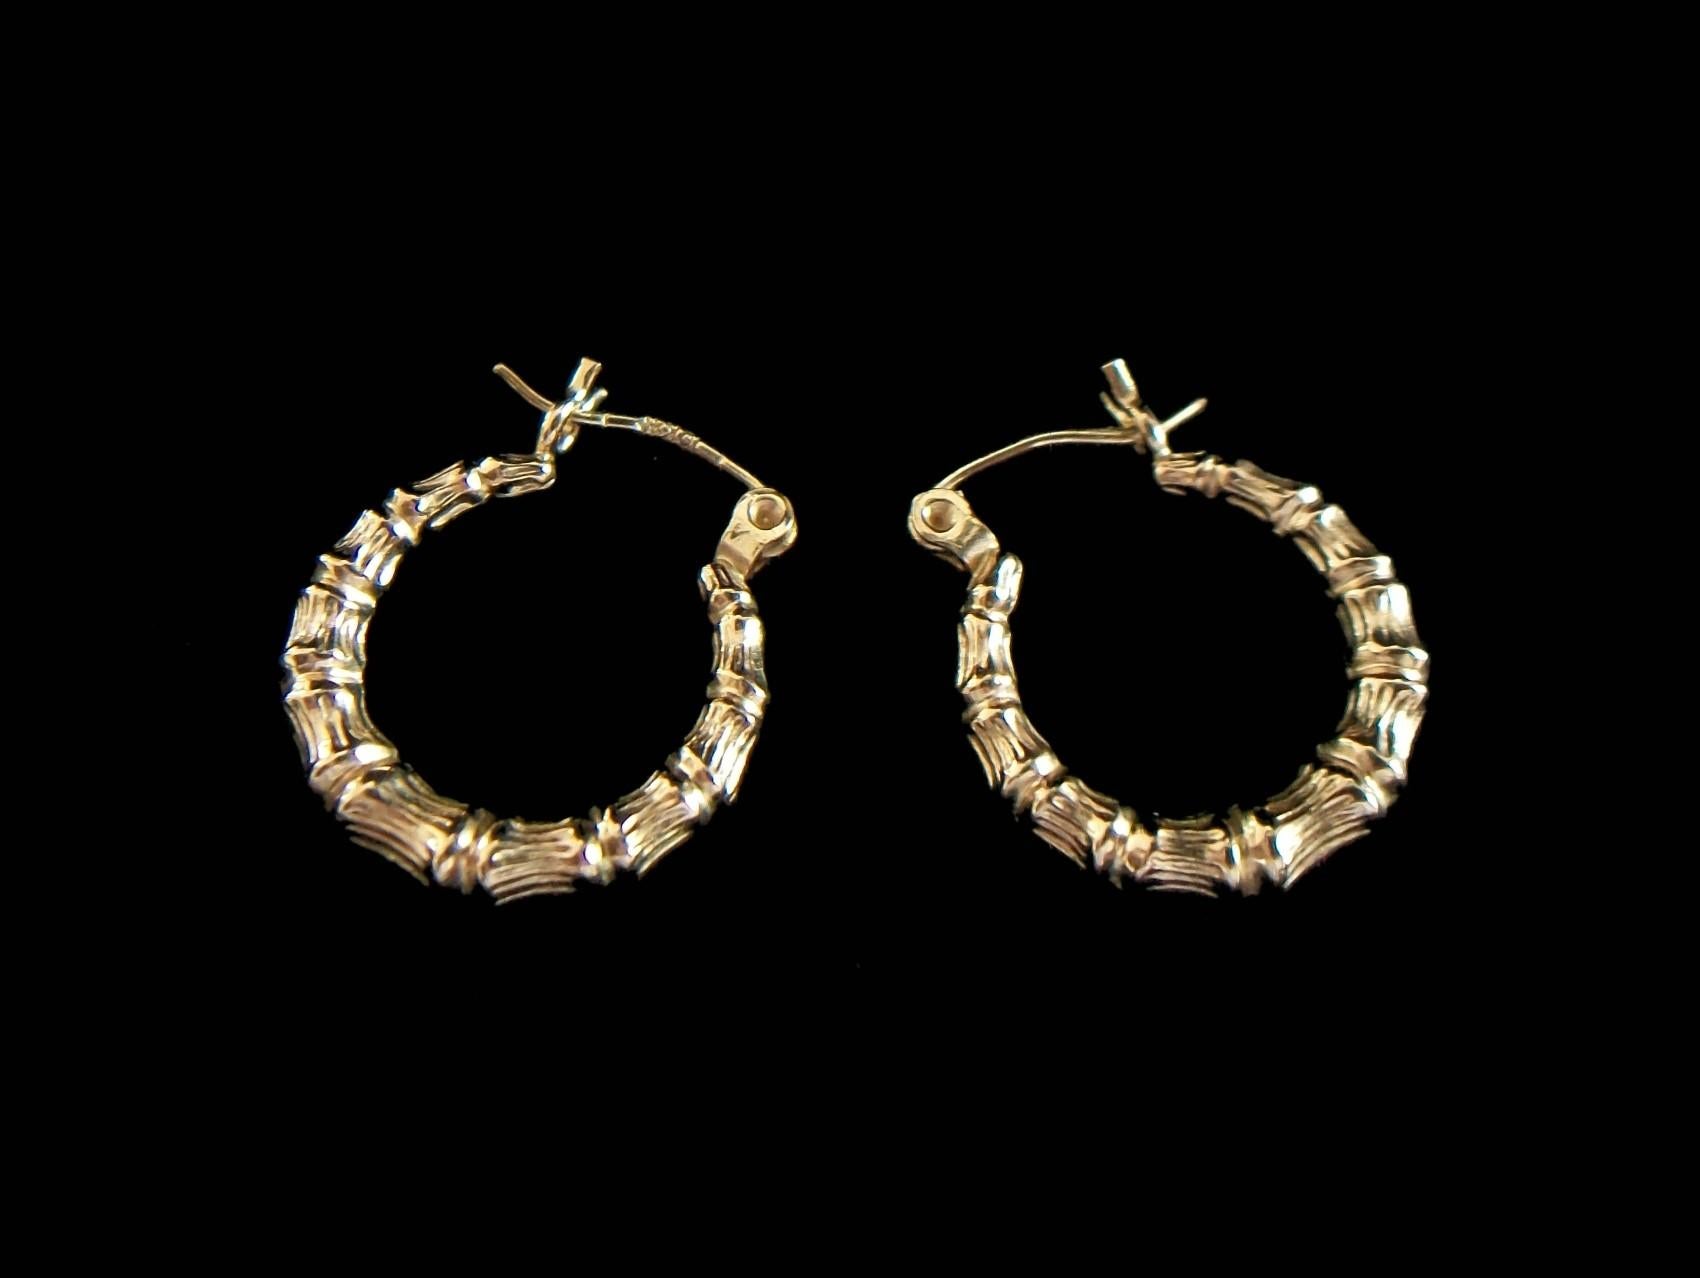 Vintage 10K yellow gold faux bamboo hoop earrings for pierced ears - stamped 10K and signed on the back ('N' within a diamond - unknown/unidentified maker) - United States (likely) - circa 1980's.

Excellent vintage condition - all original - no